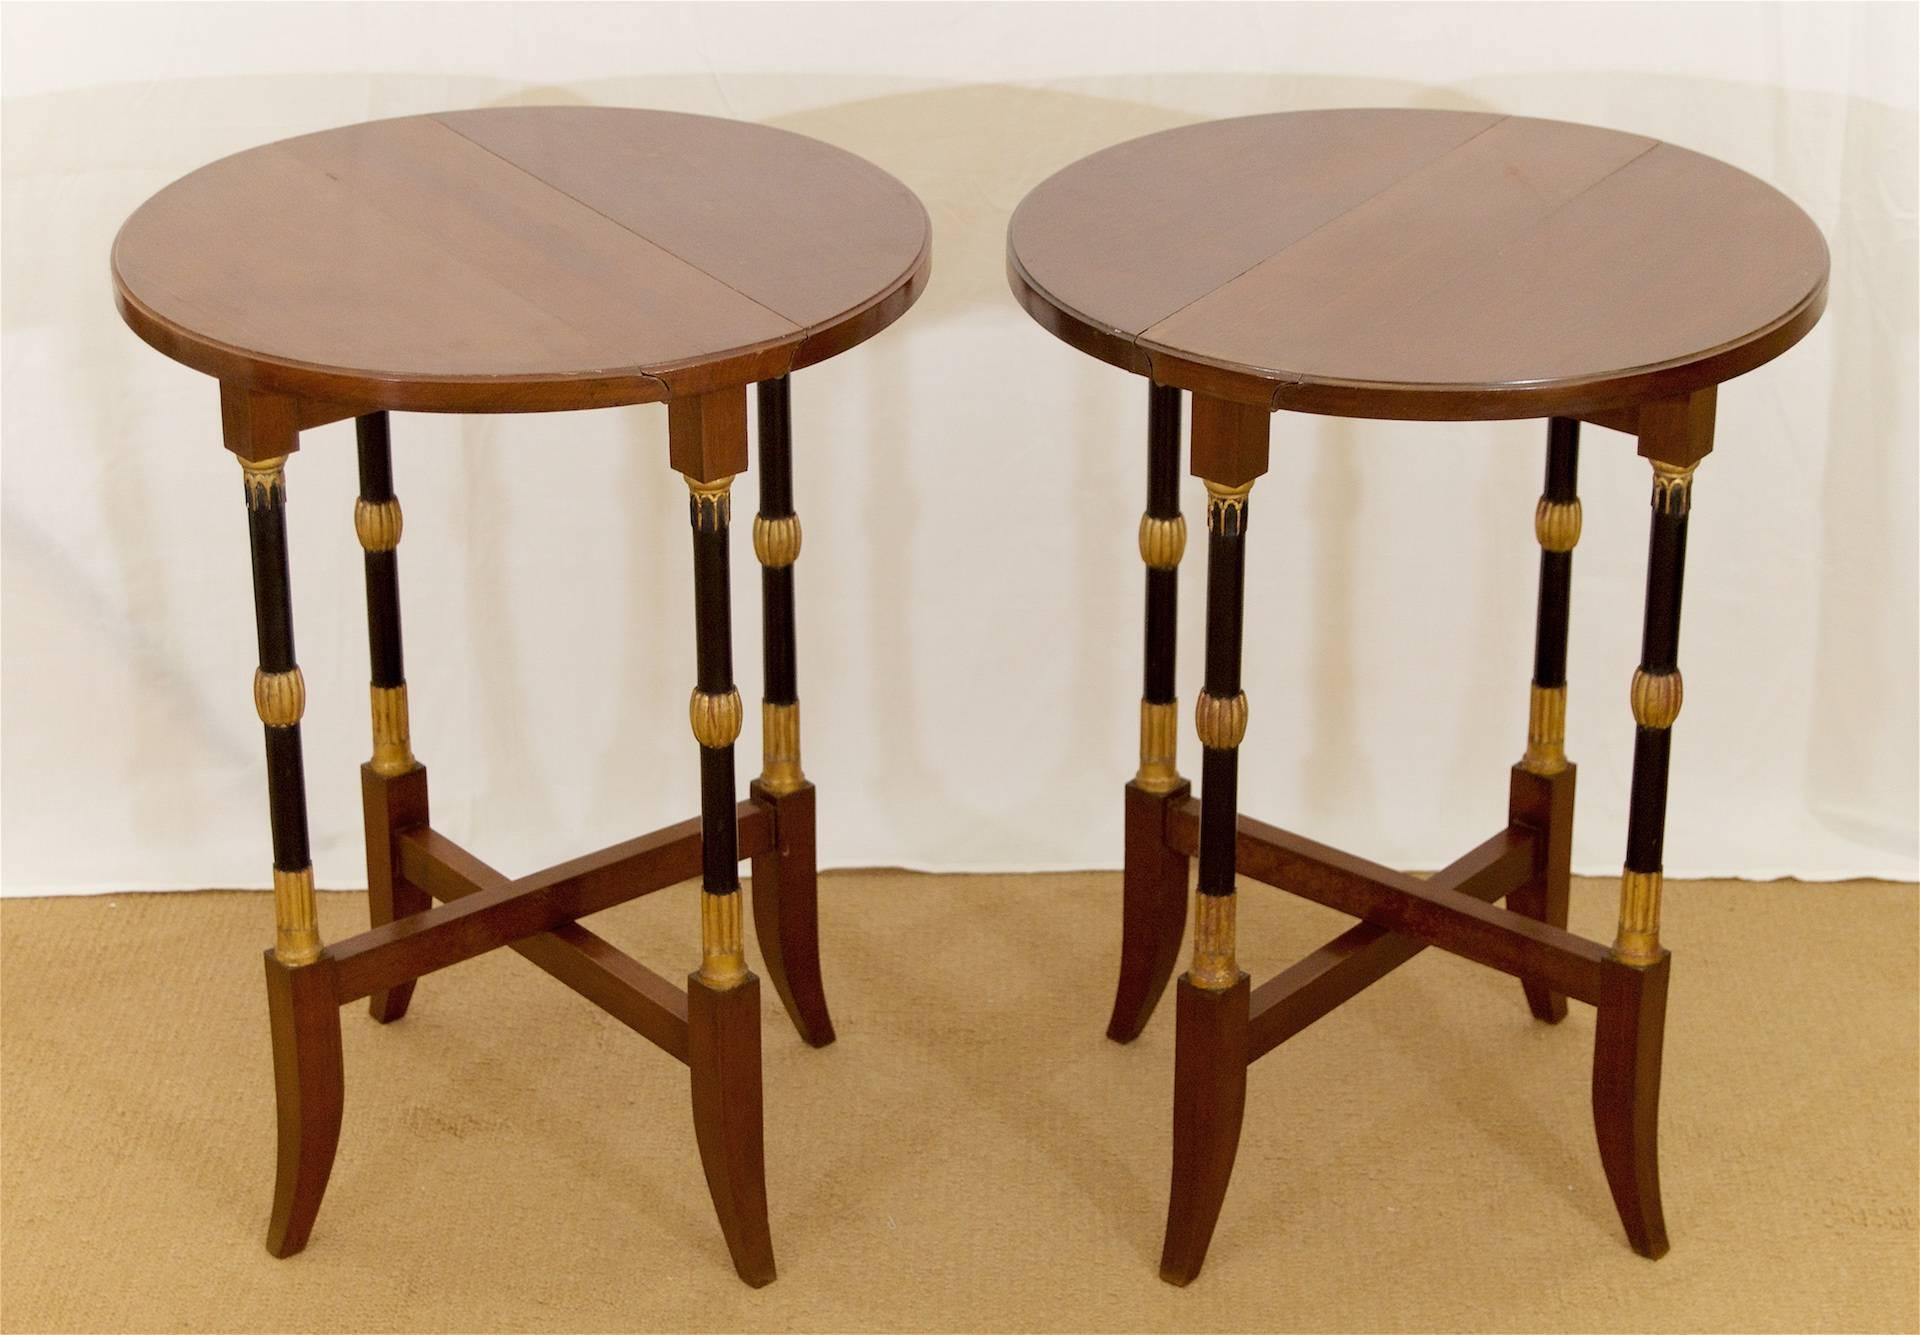 Excellently sized vintage folding occasional tables in a Regency style, original to the Fontainebleau hotel. Varnished wood with ebonized and gilt detailing to legs.

Priced per piece.

Two available in original condition. Others available